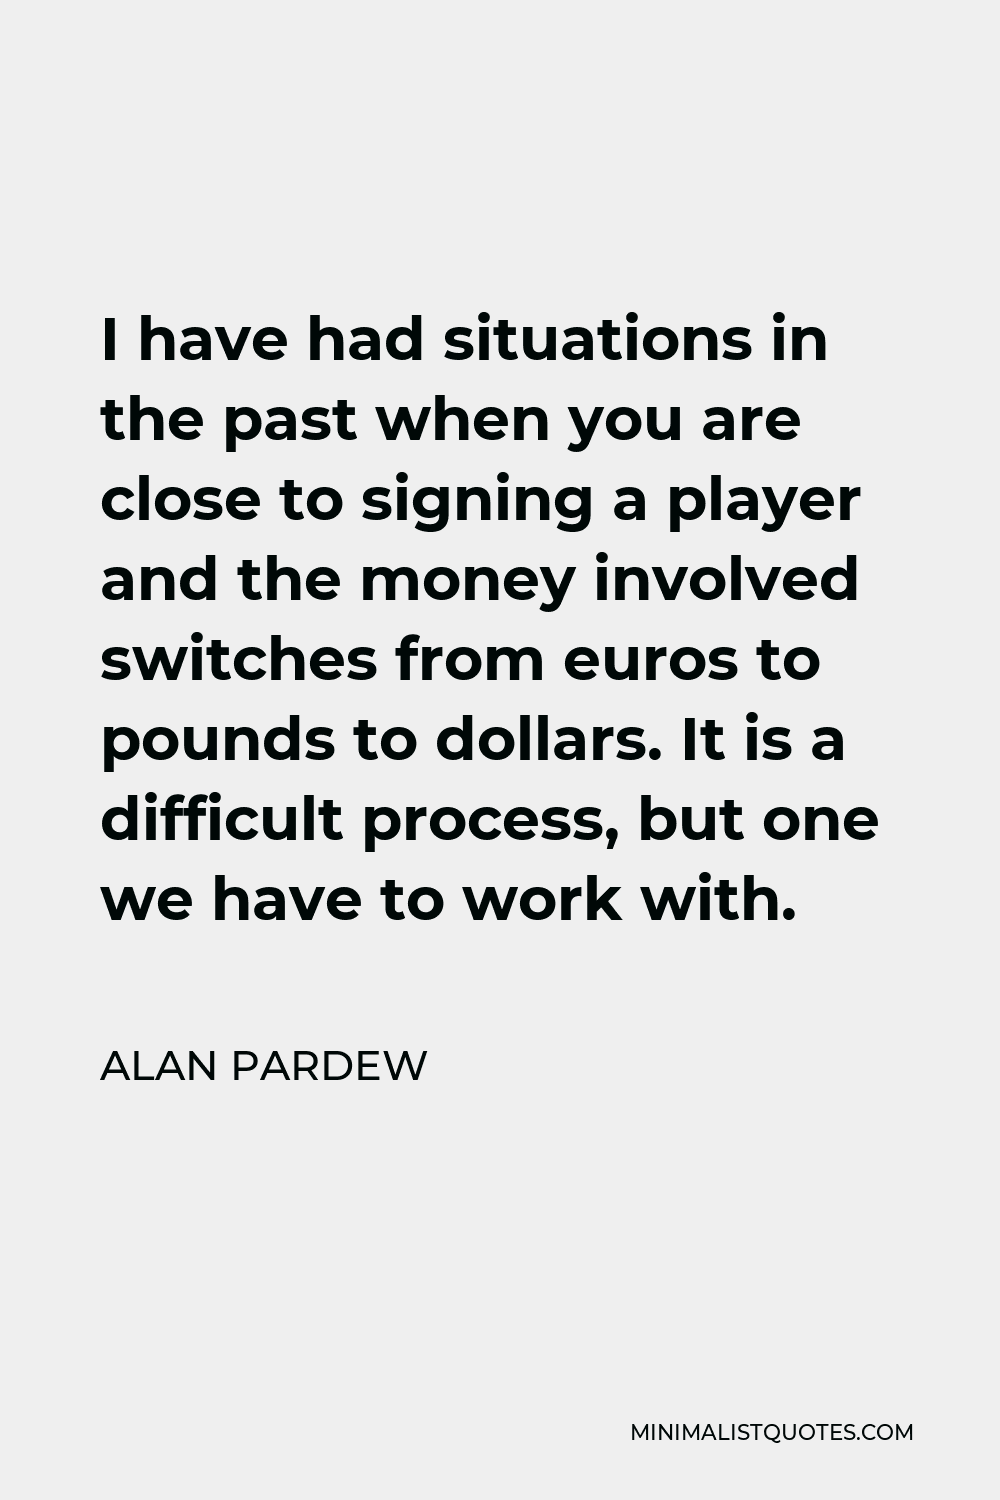 Alan Pardew Quote - I have had situations in the past when you are close to signing a player and the money involved switches from euros to pounds to dollars. It is a difficult process, but one we have to work with.